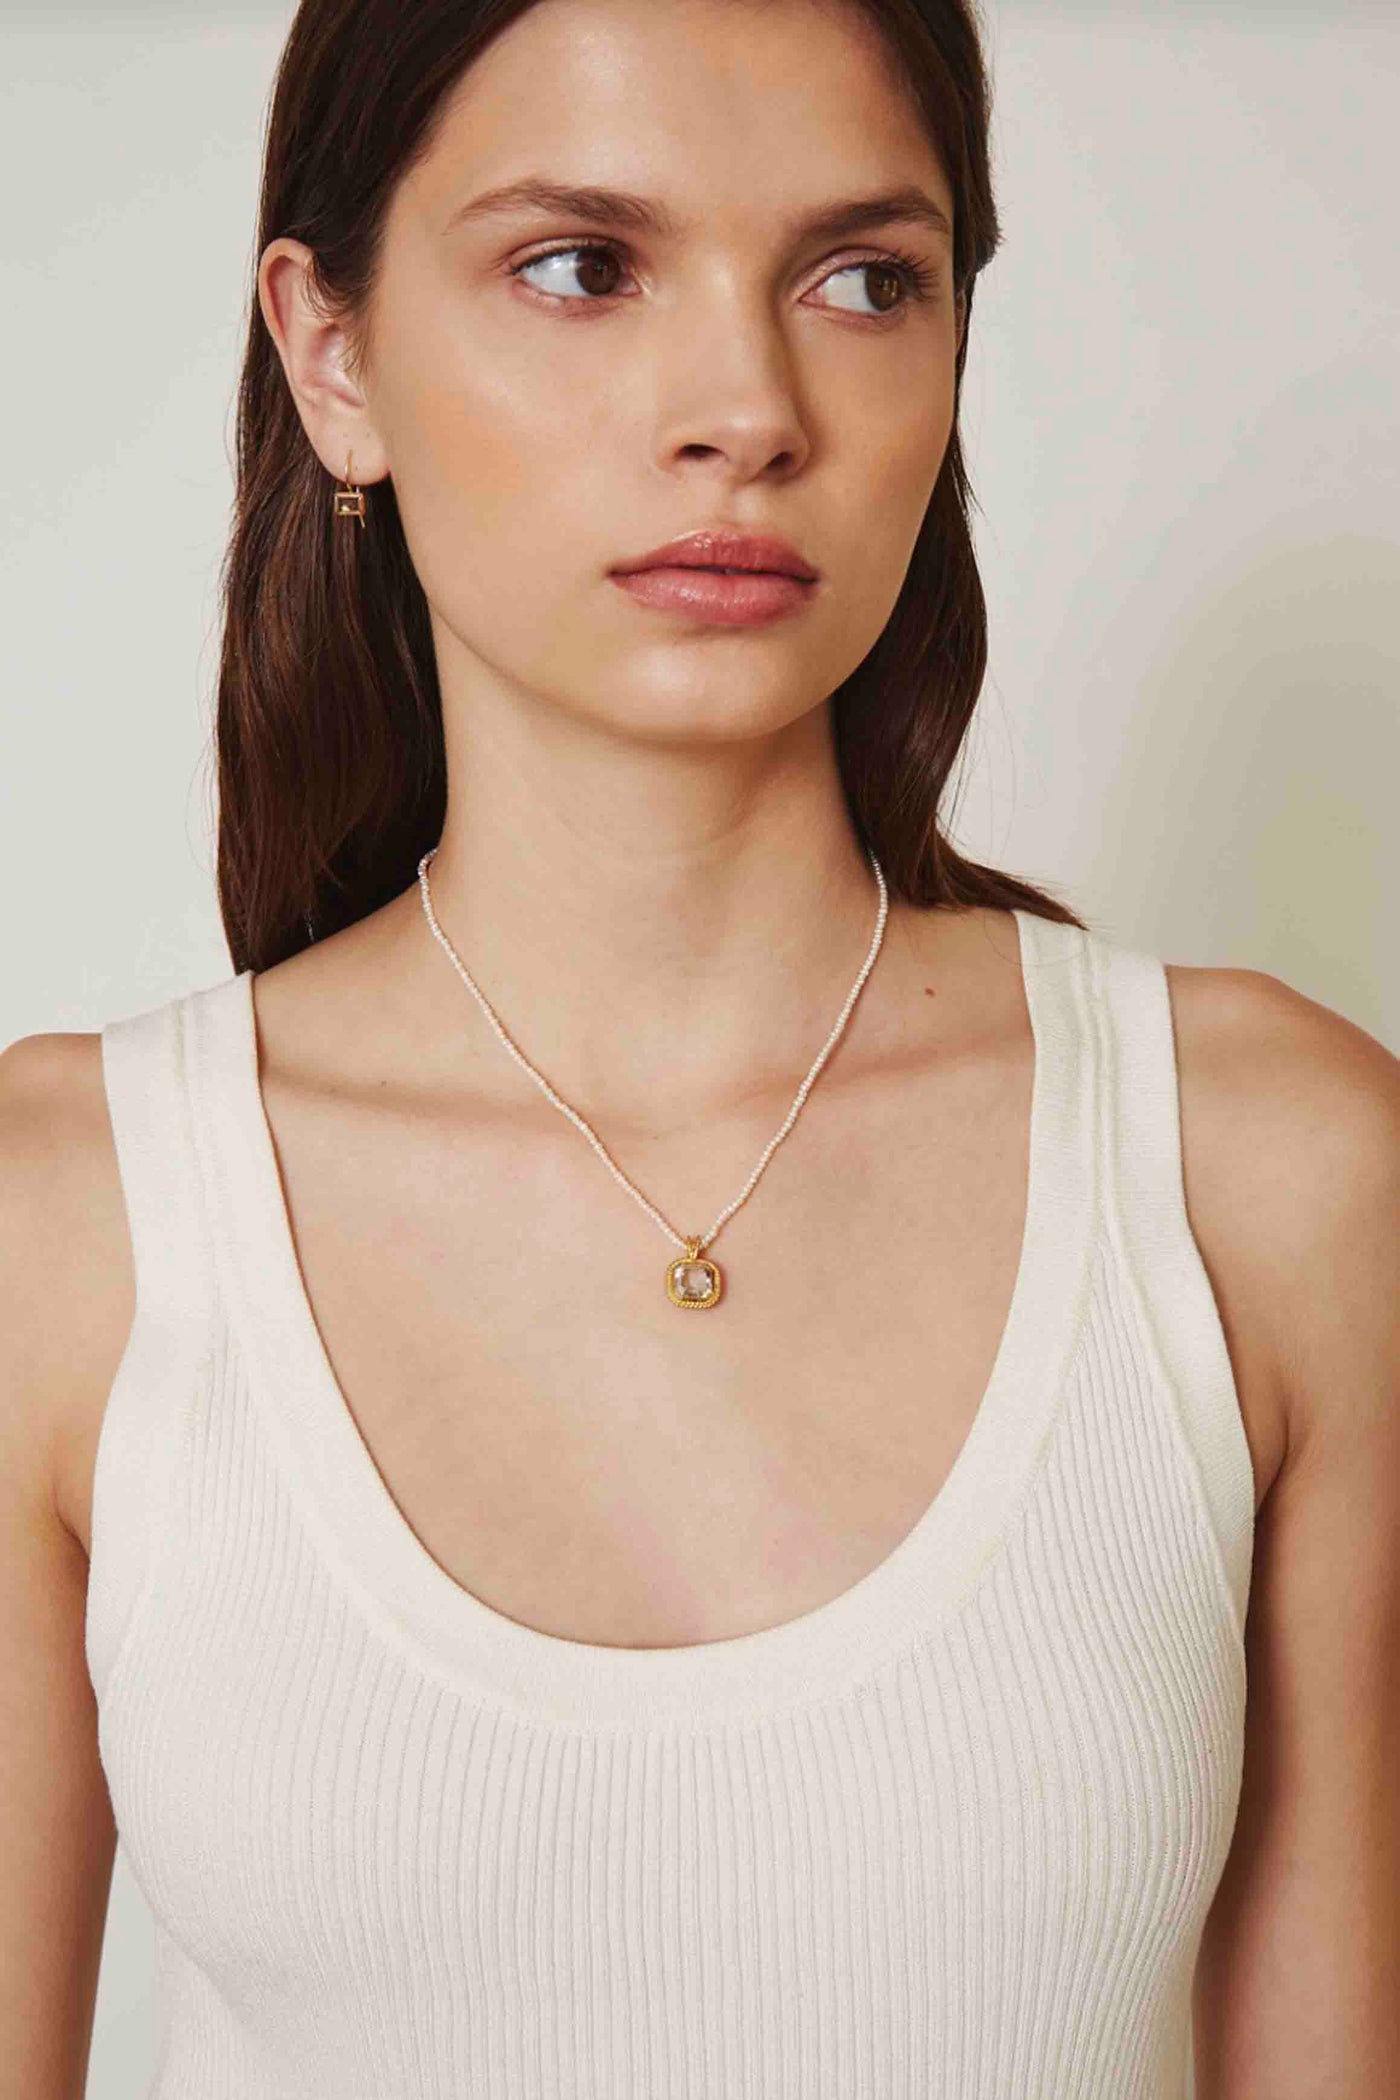 Model wearing the White Pearl Necklace with Bezel Silver Shade Crystal by Chan Luu